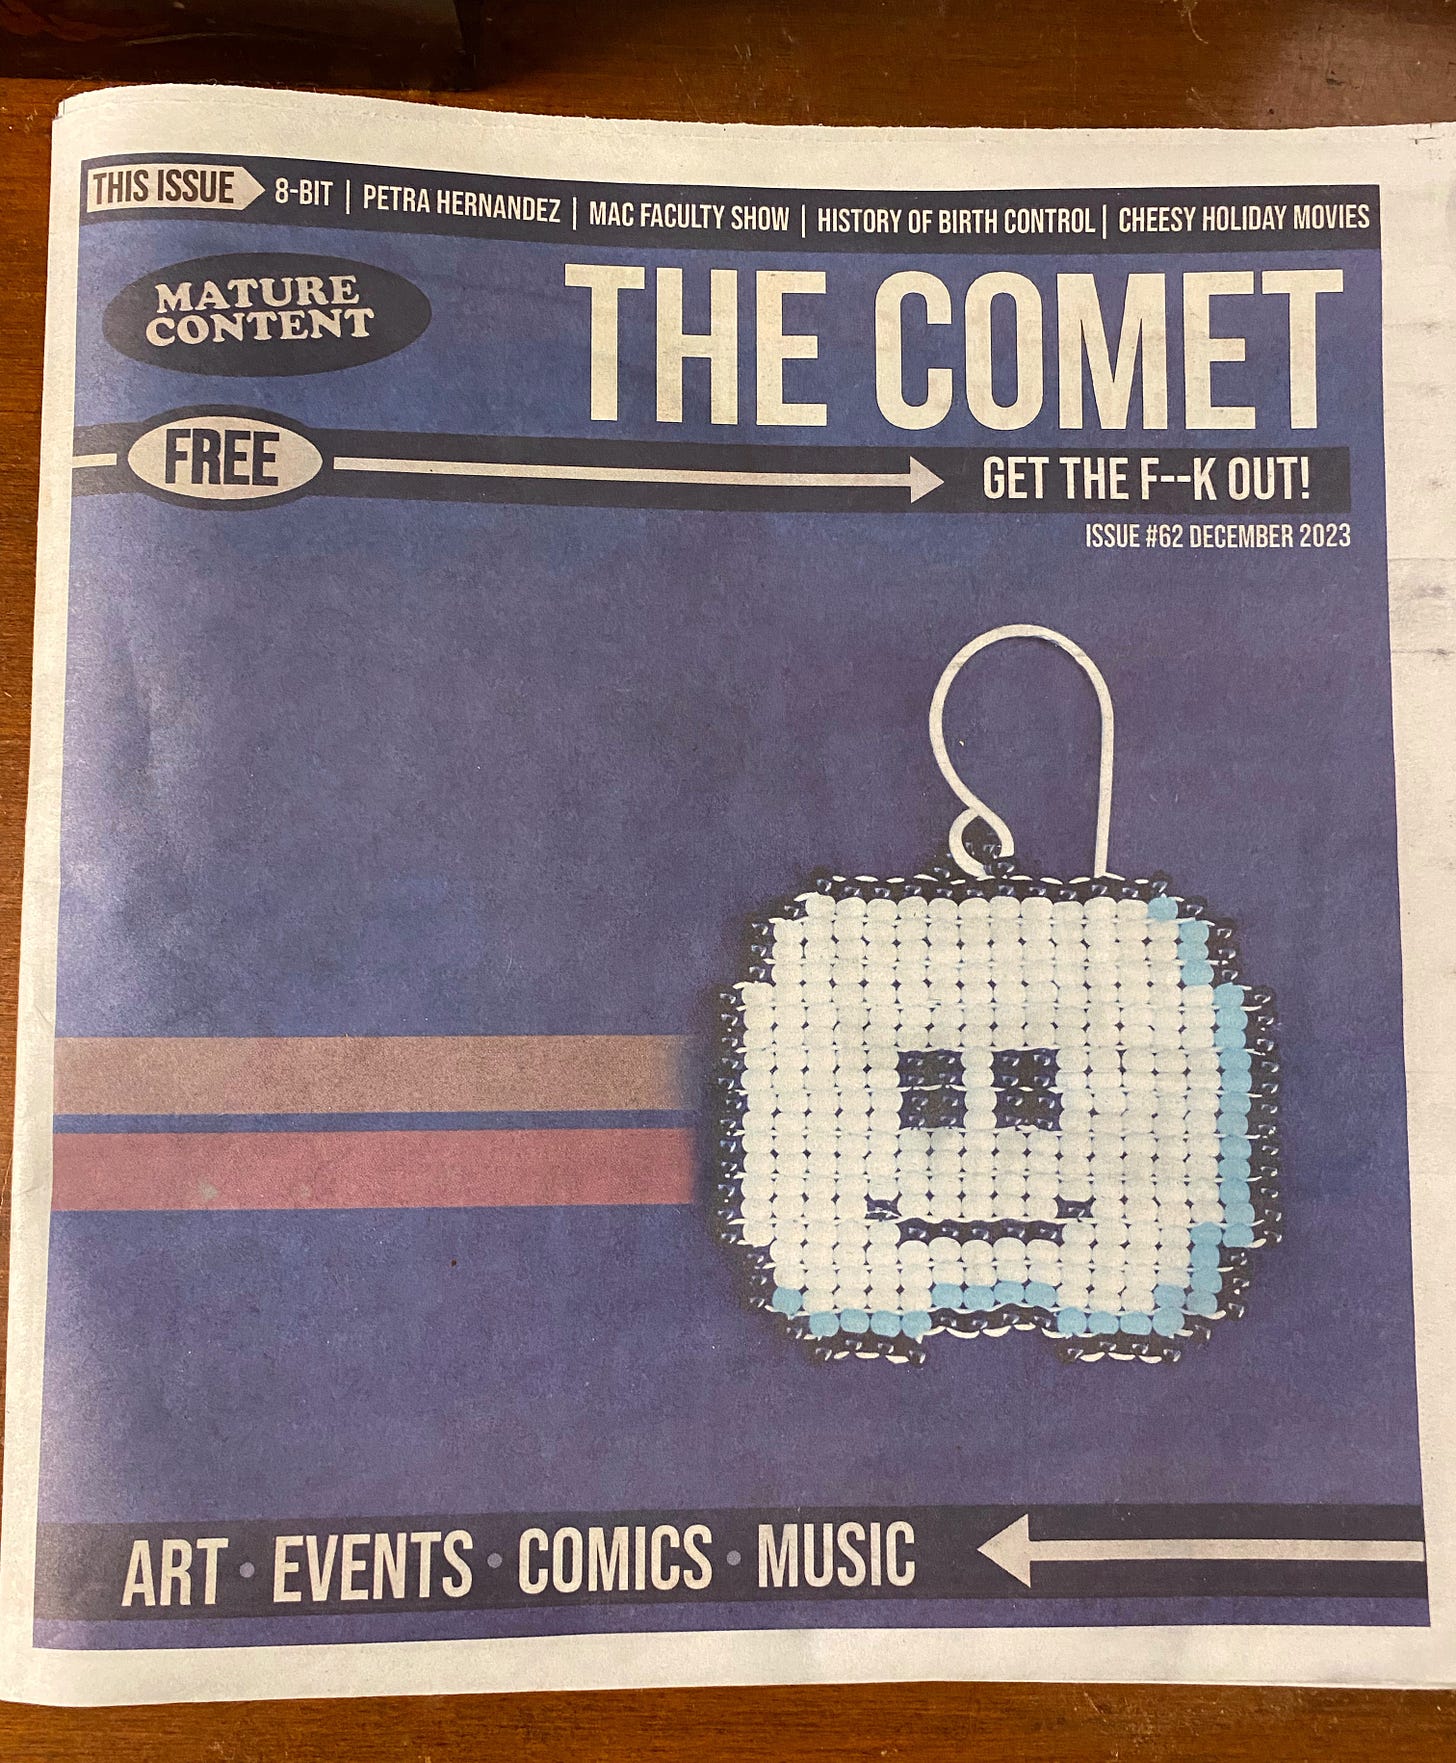 A photo of The Comet newspaper with my name on the top.